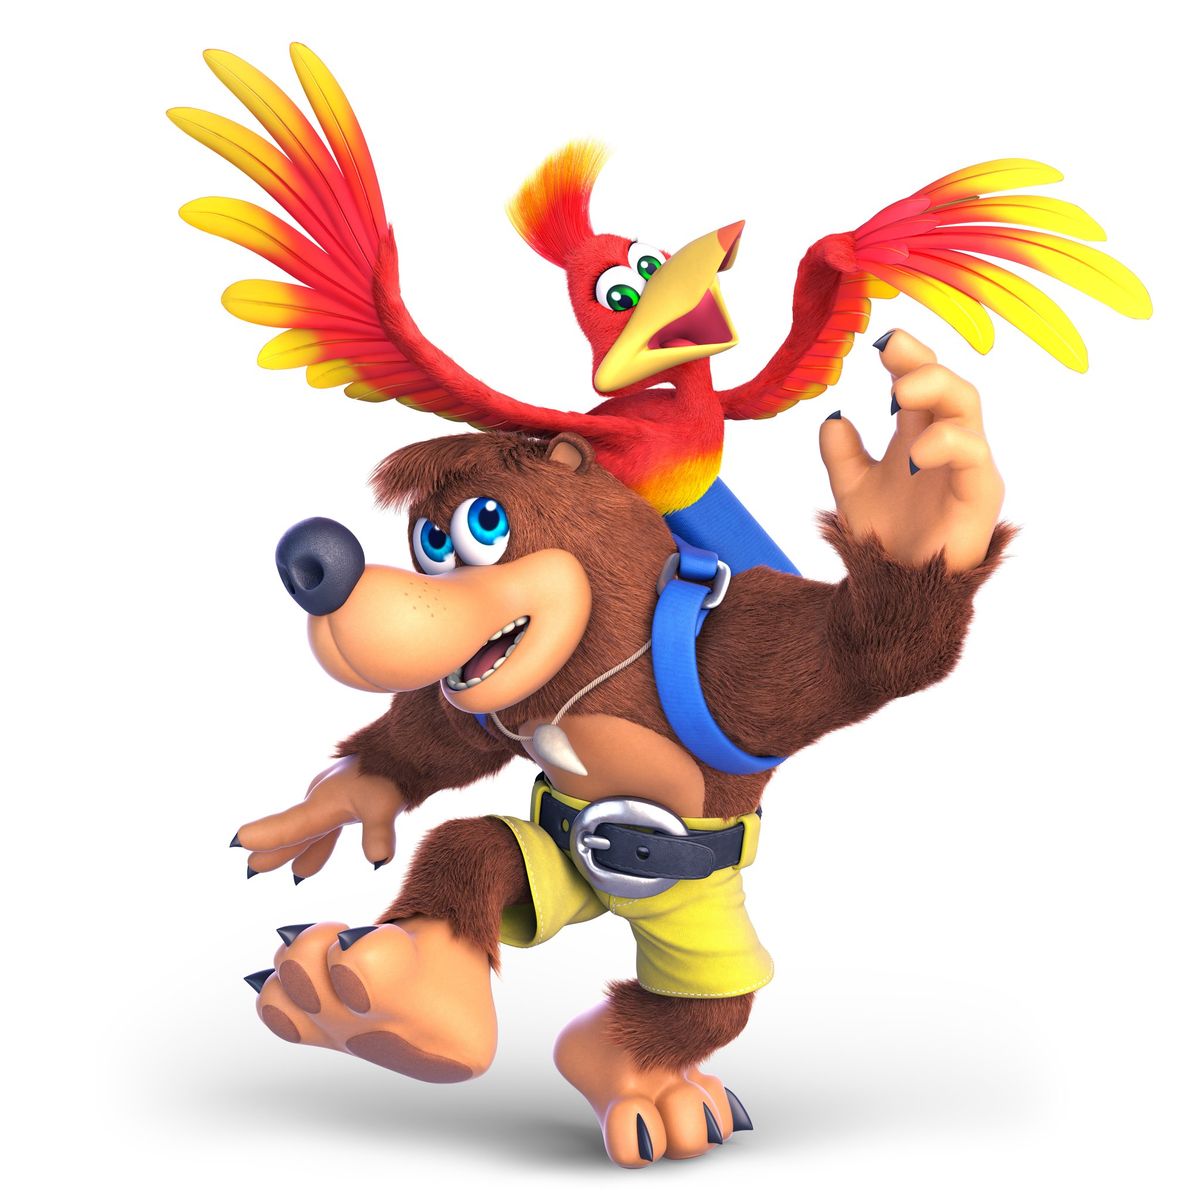 How to counter Banjo And Kazooie with Diddy Kong in Super Smash Bros. Ultimate